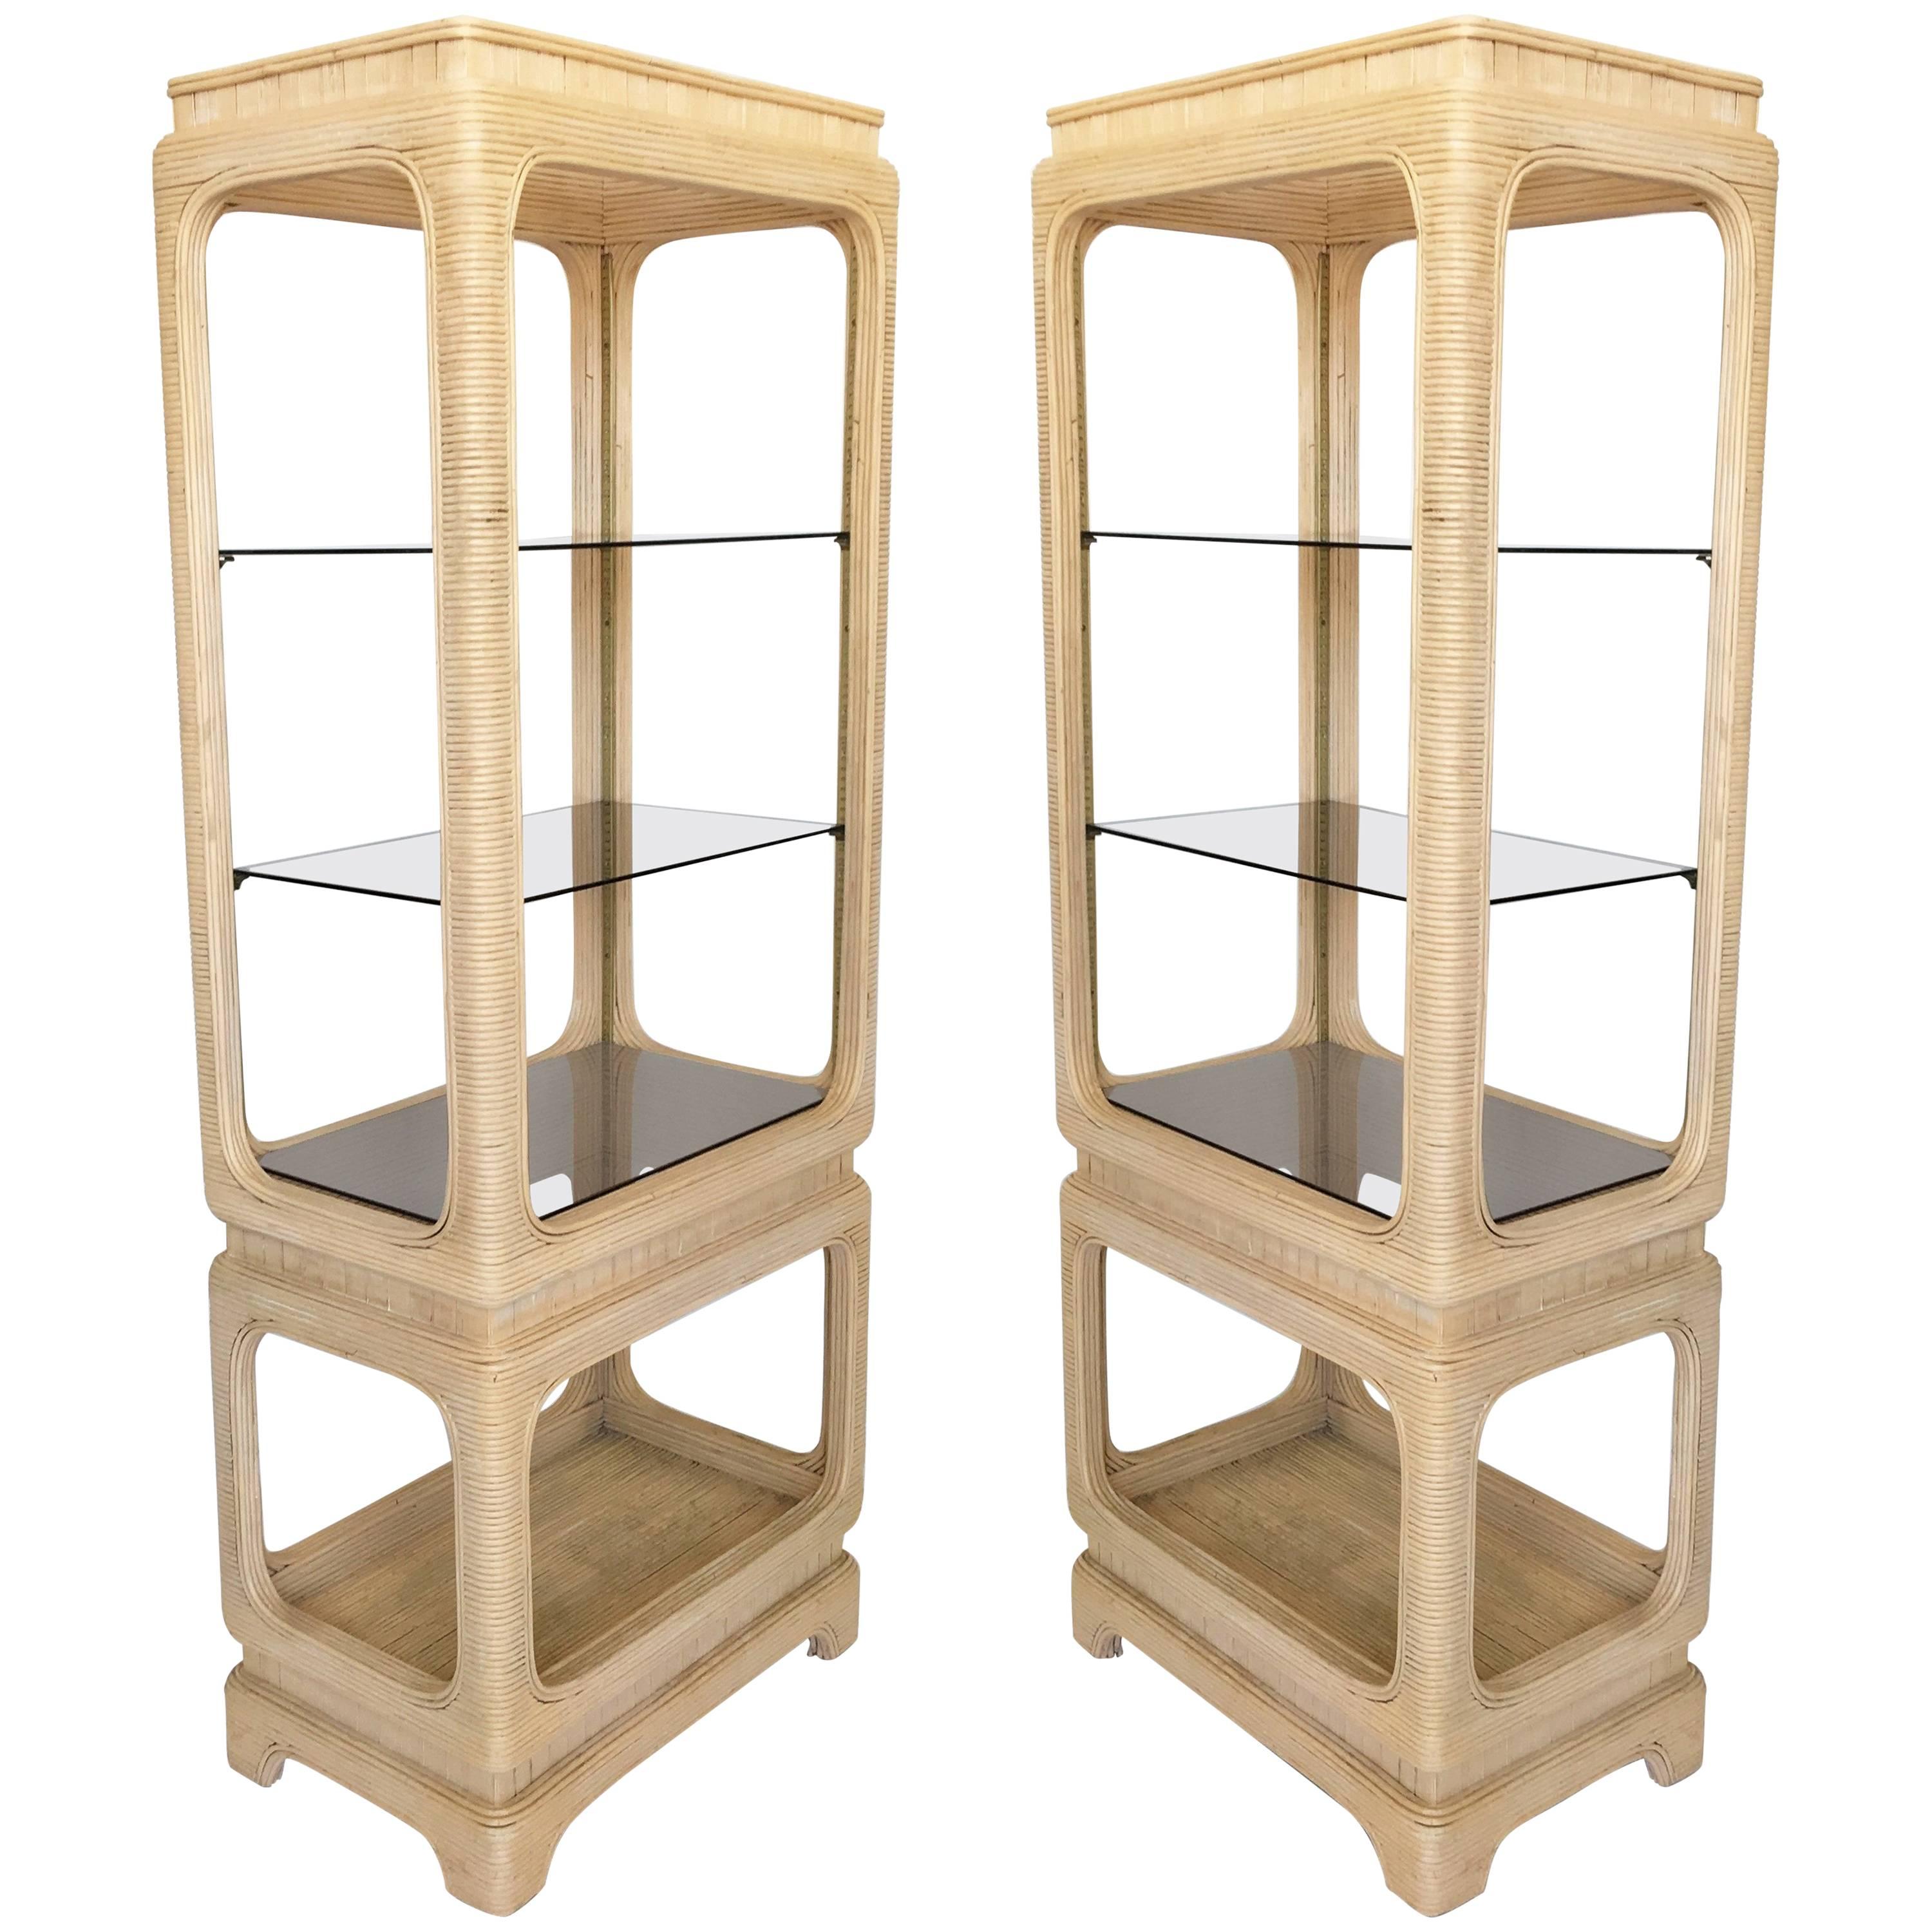 Pair of Vintage Mid-Century Modern Pencil Reed Bamboo Rattan Etageres For Sale